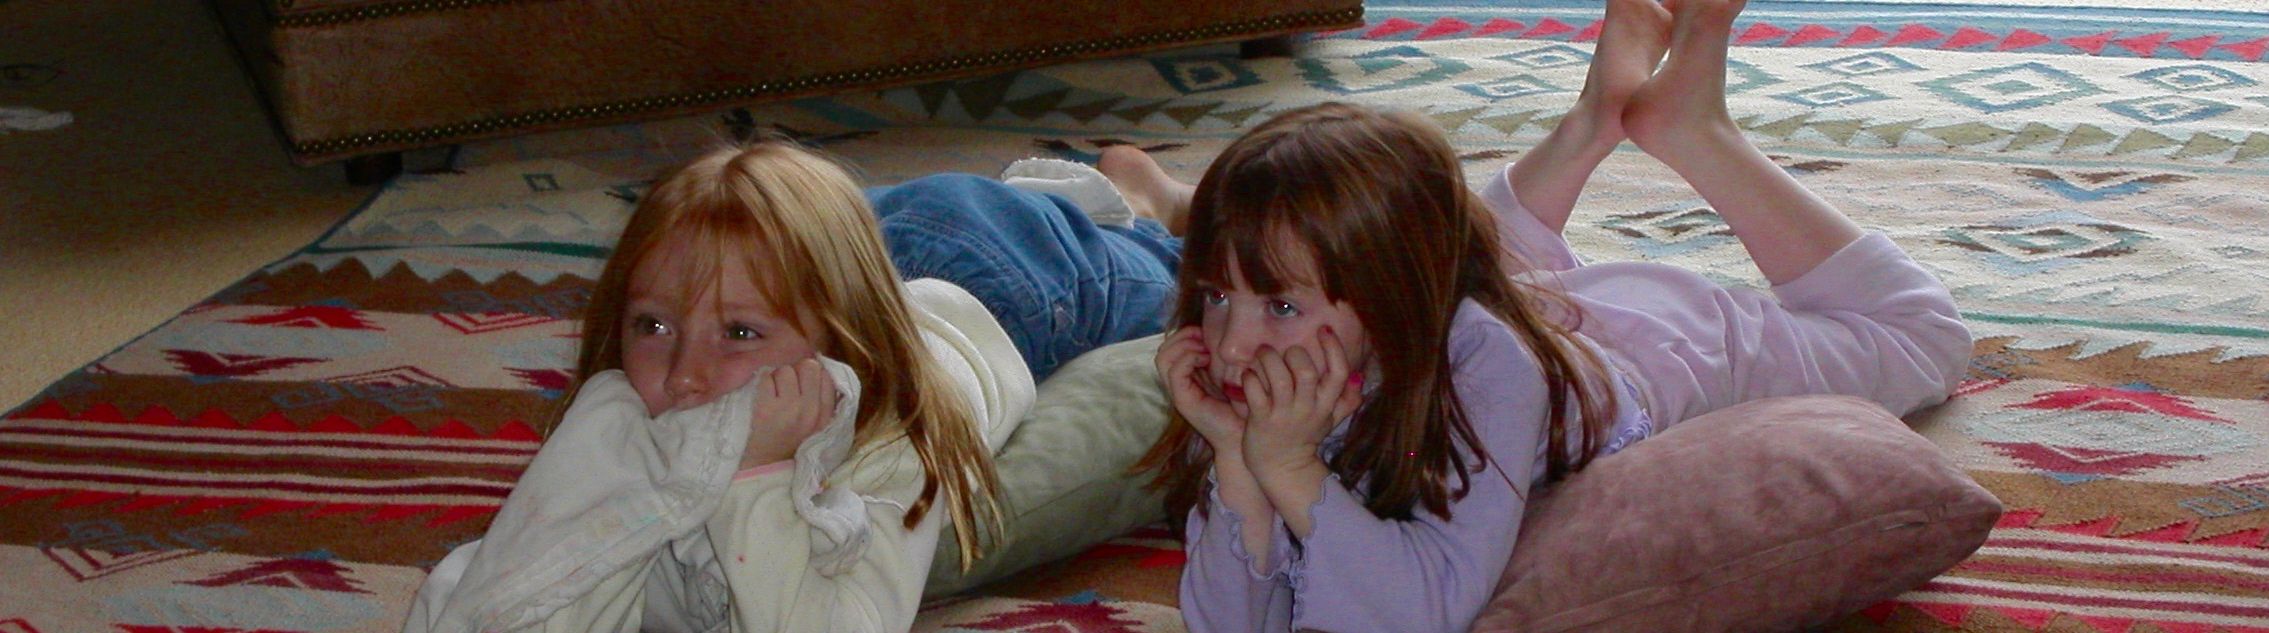 11 Things You'll Only Understand If You Have A Sister